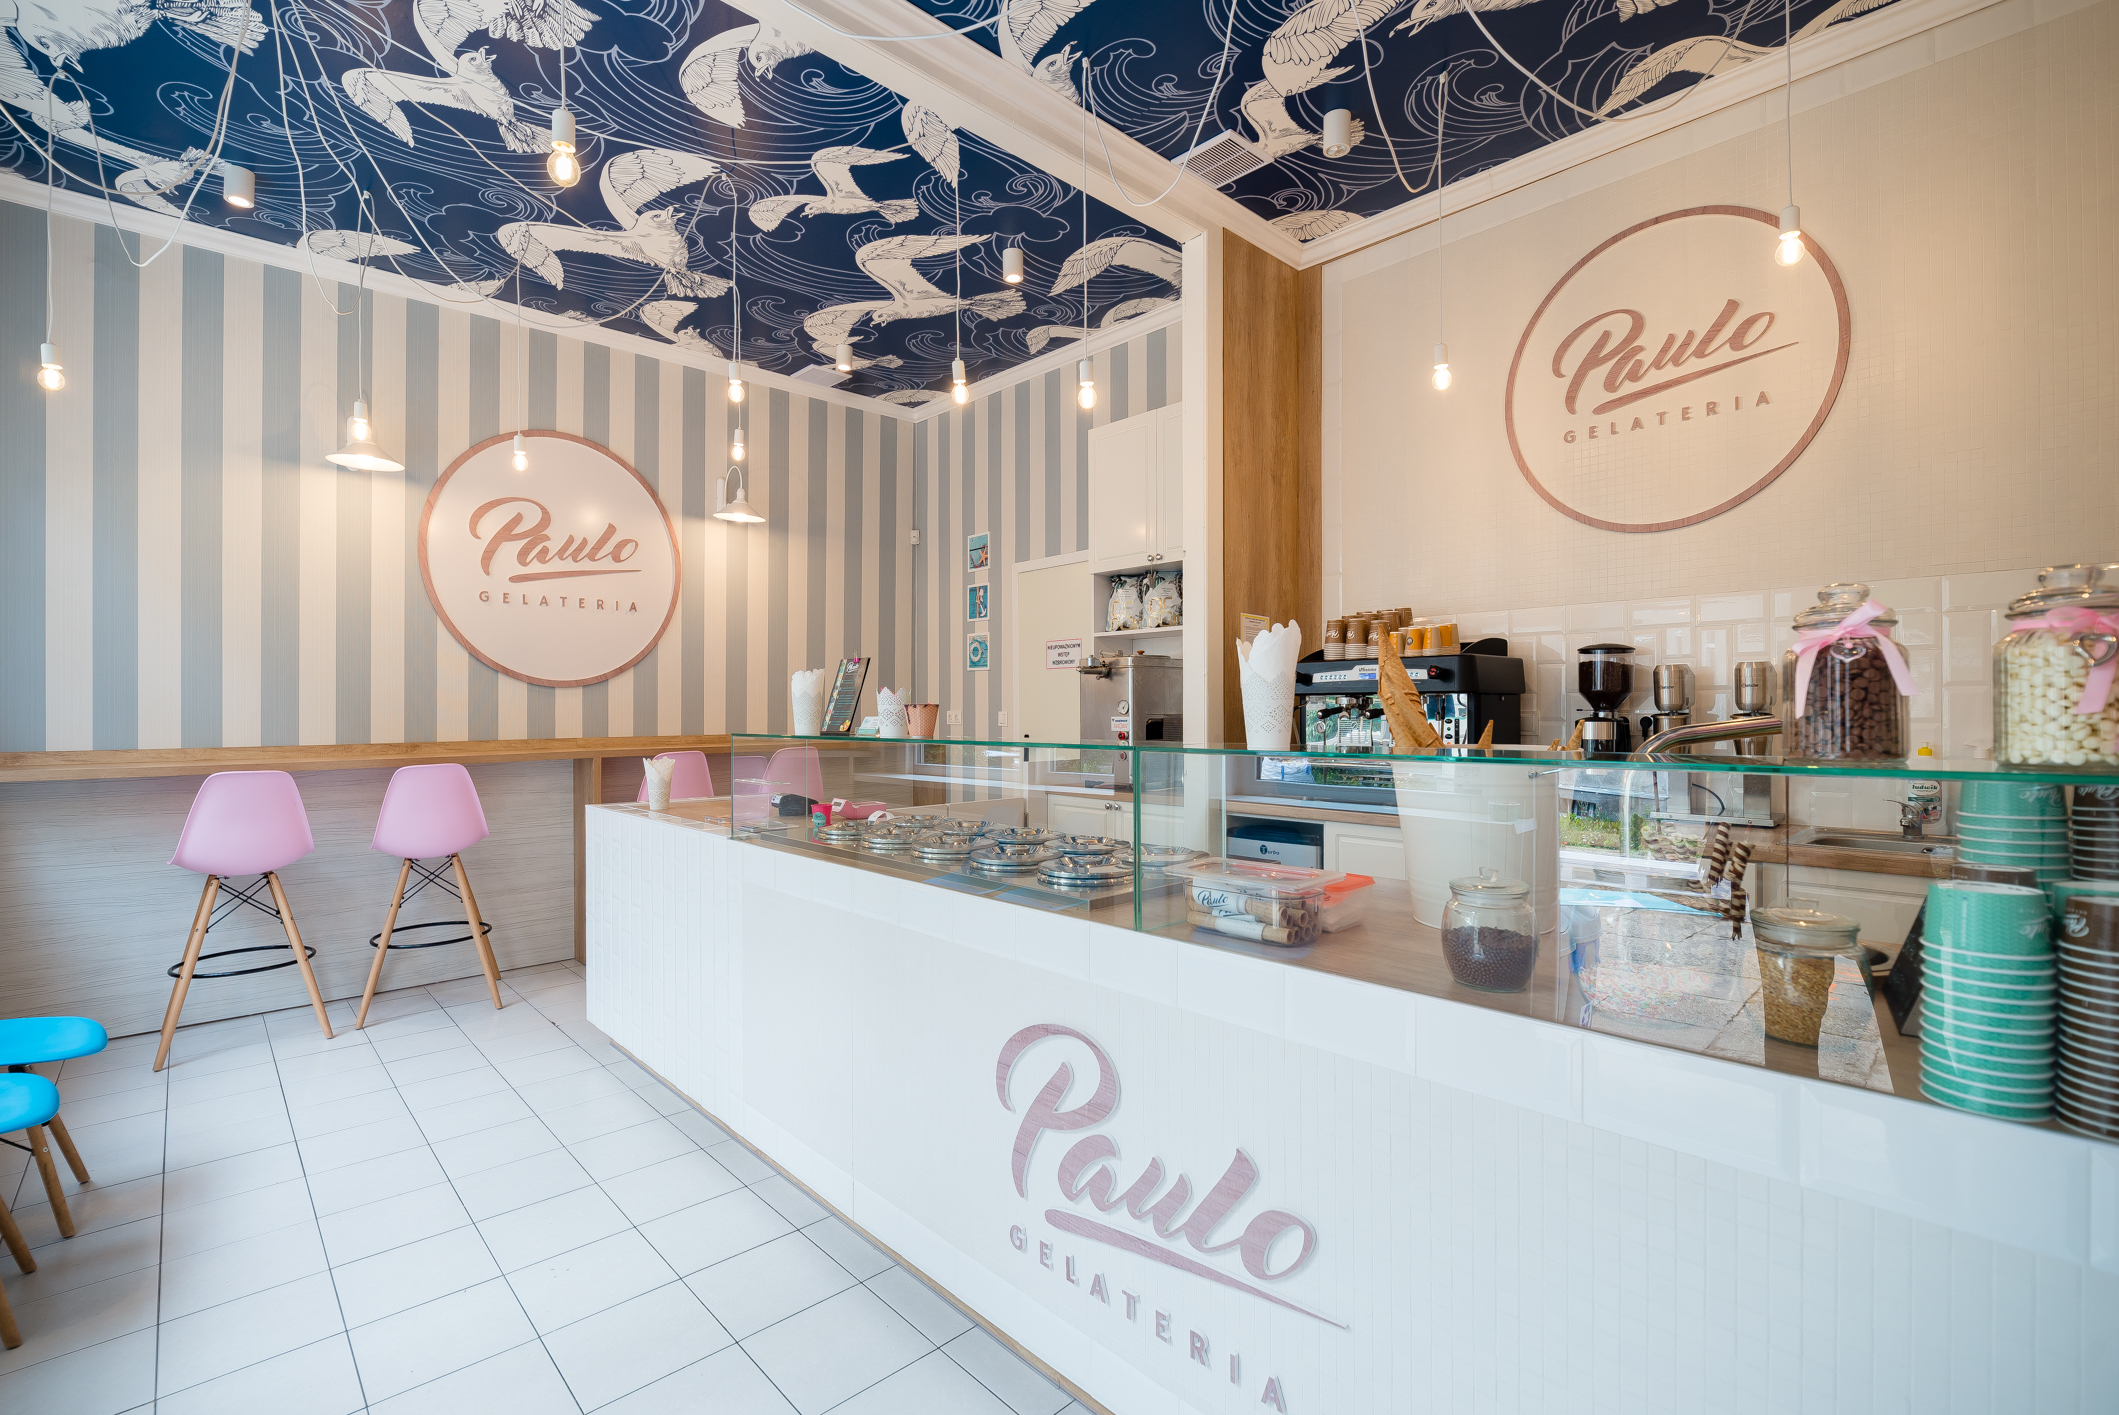 Paulo ice cream parlor in Gdańsk